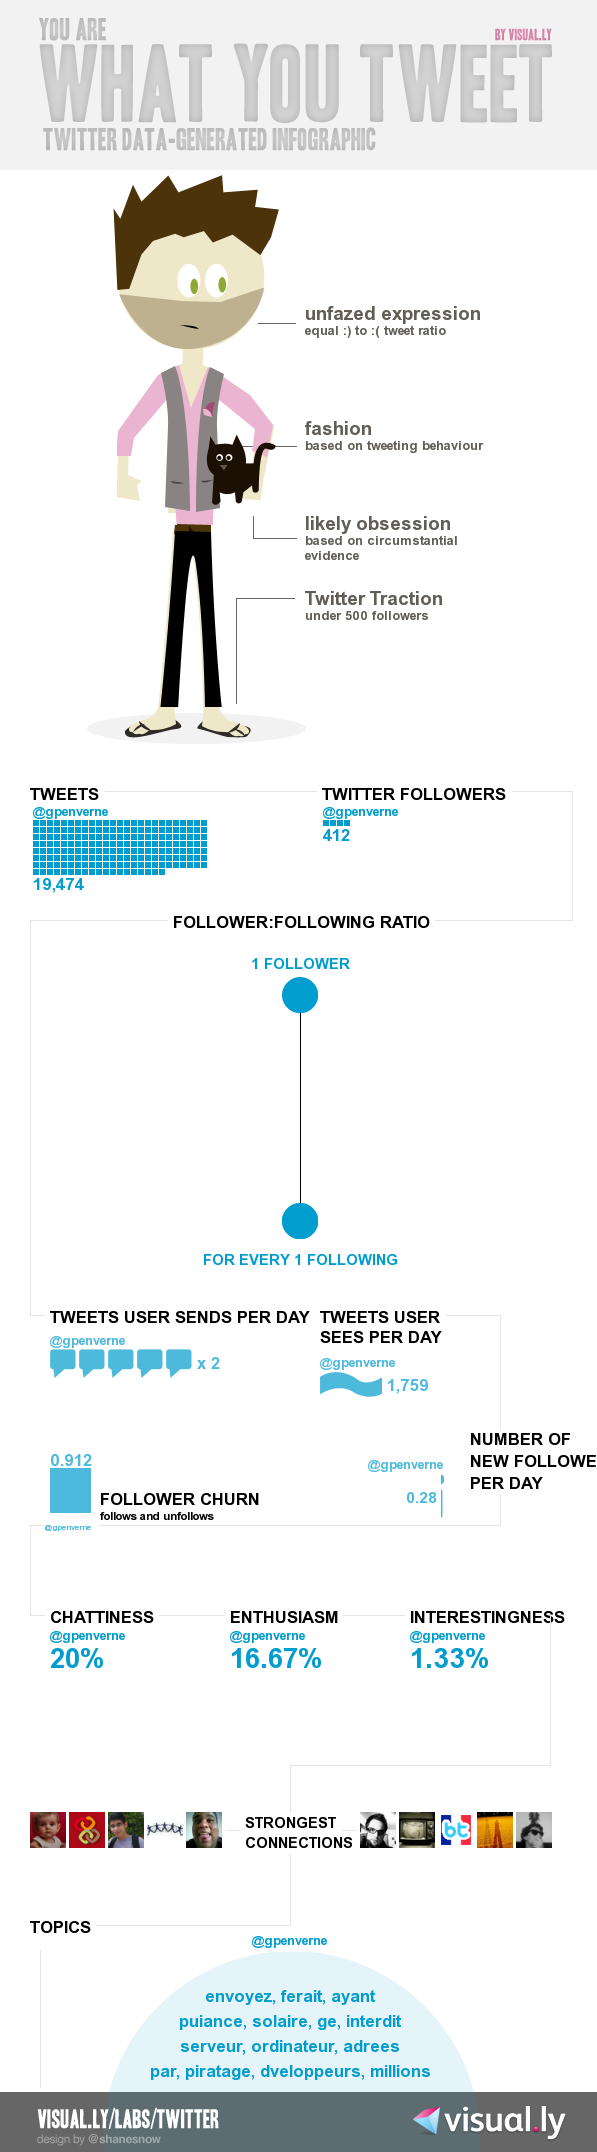 infographie twitter visual.ly